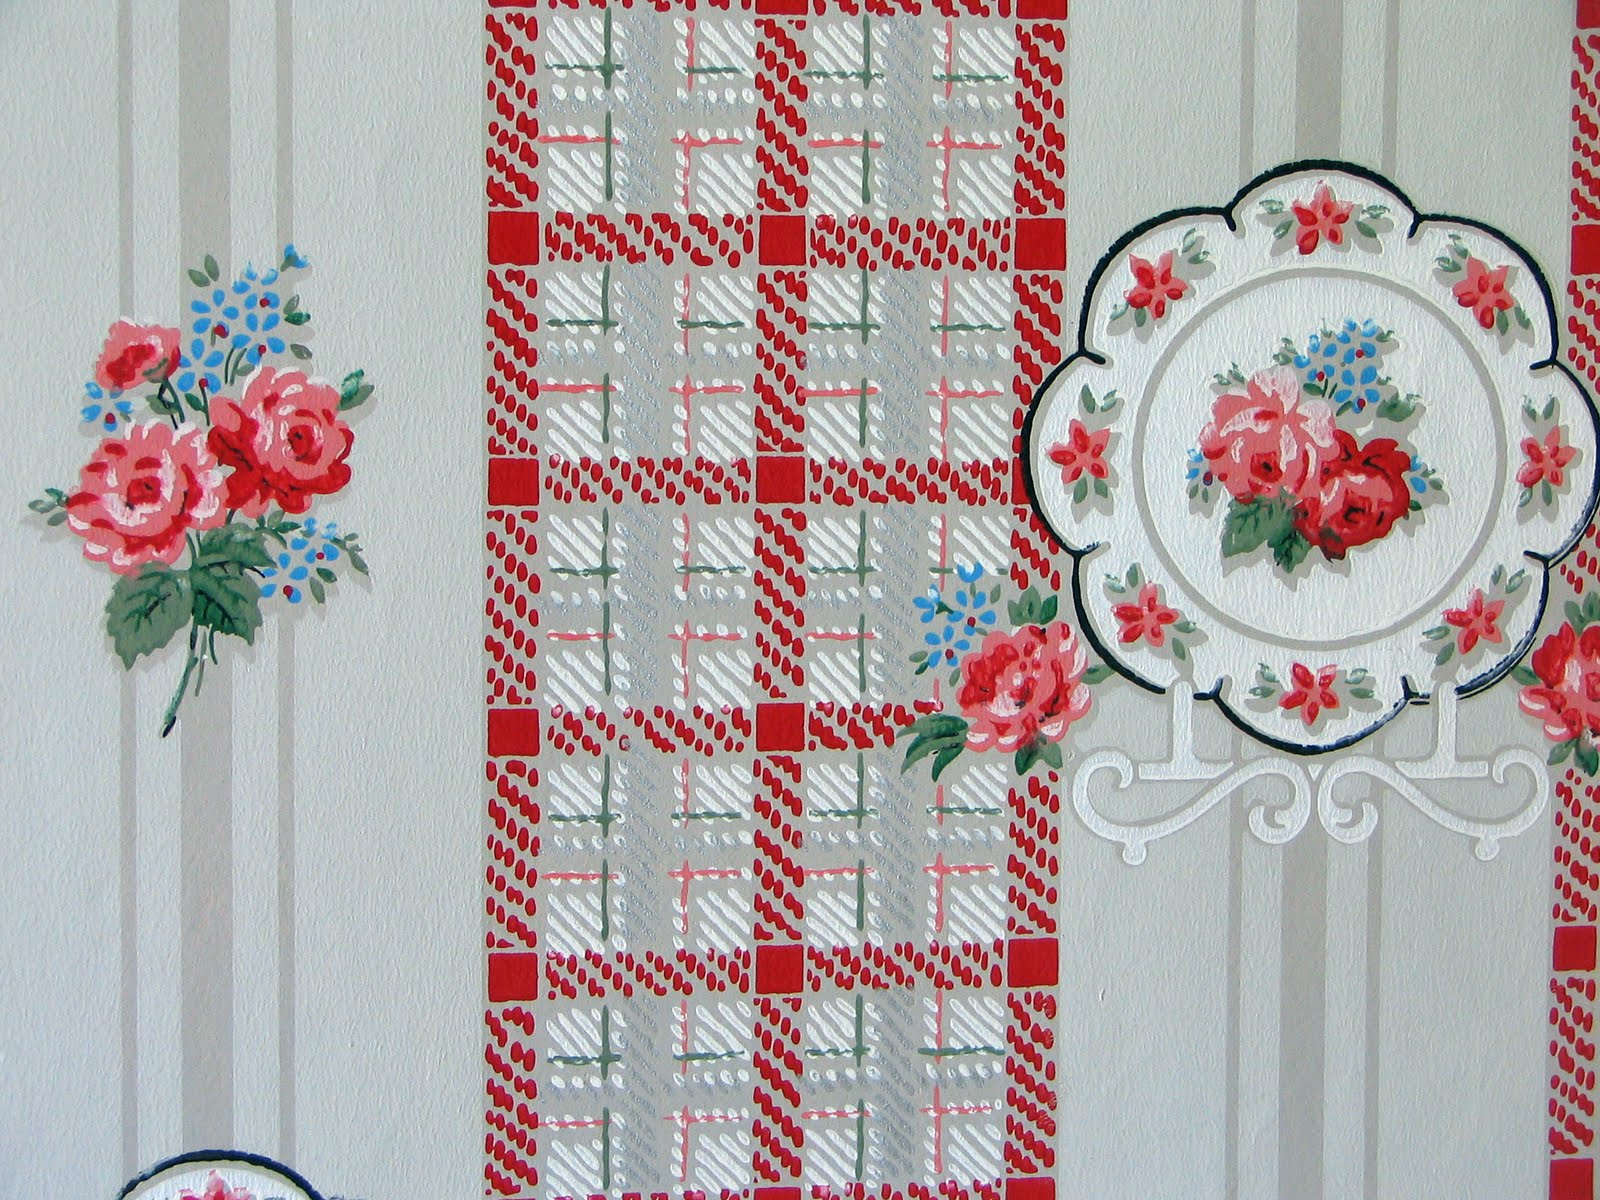 country cottage style wallpaper,needlework,textile,cross stitch,embroidery,tablecloth